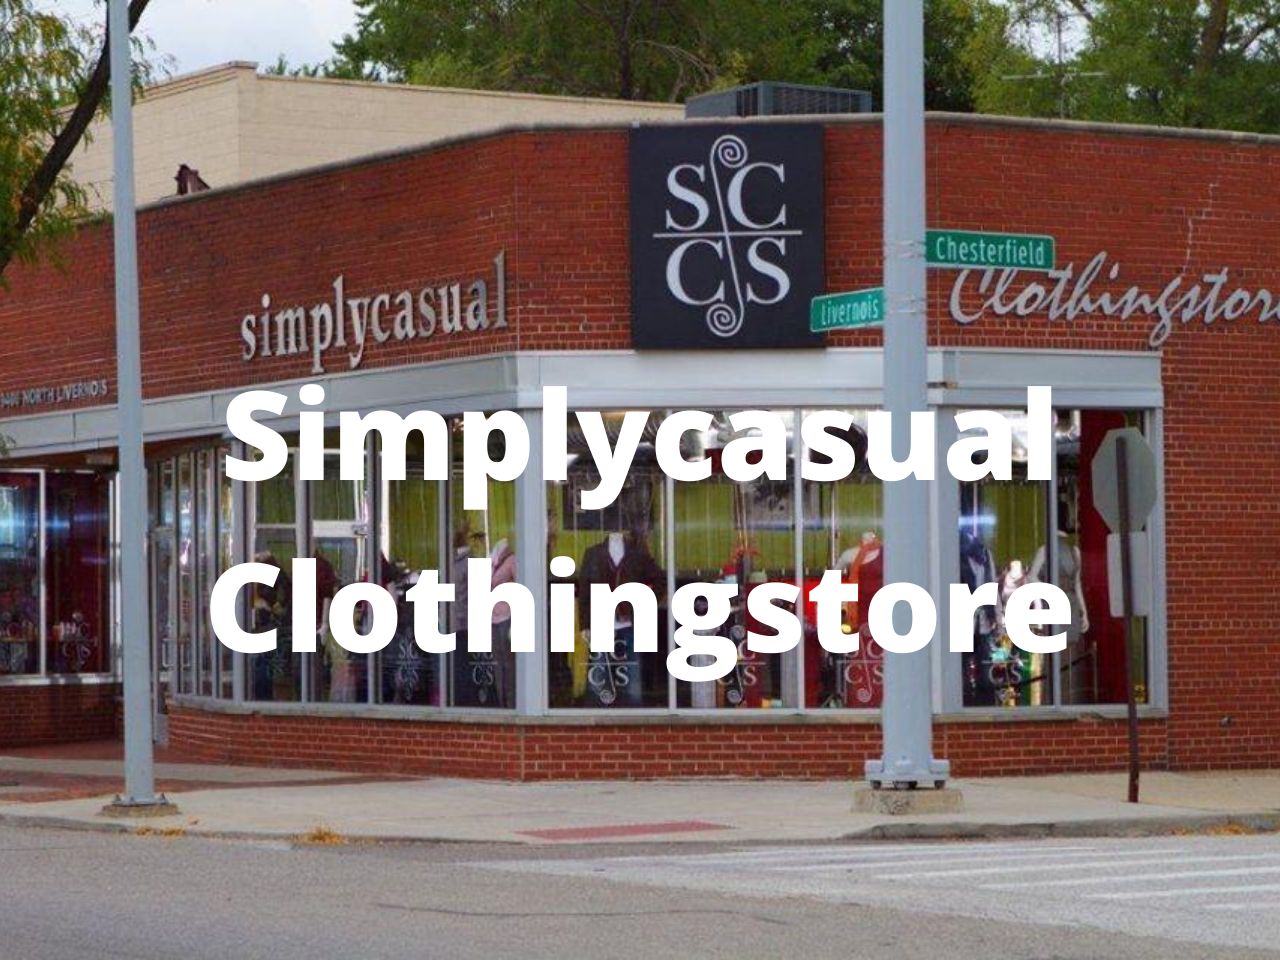 Simplycasual Clothingstore